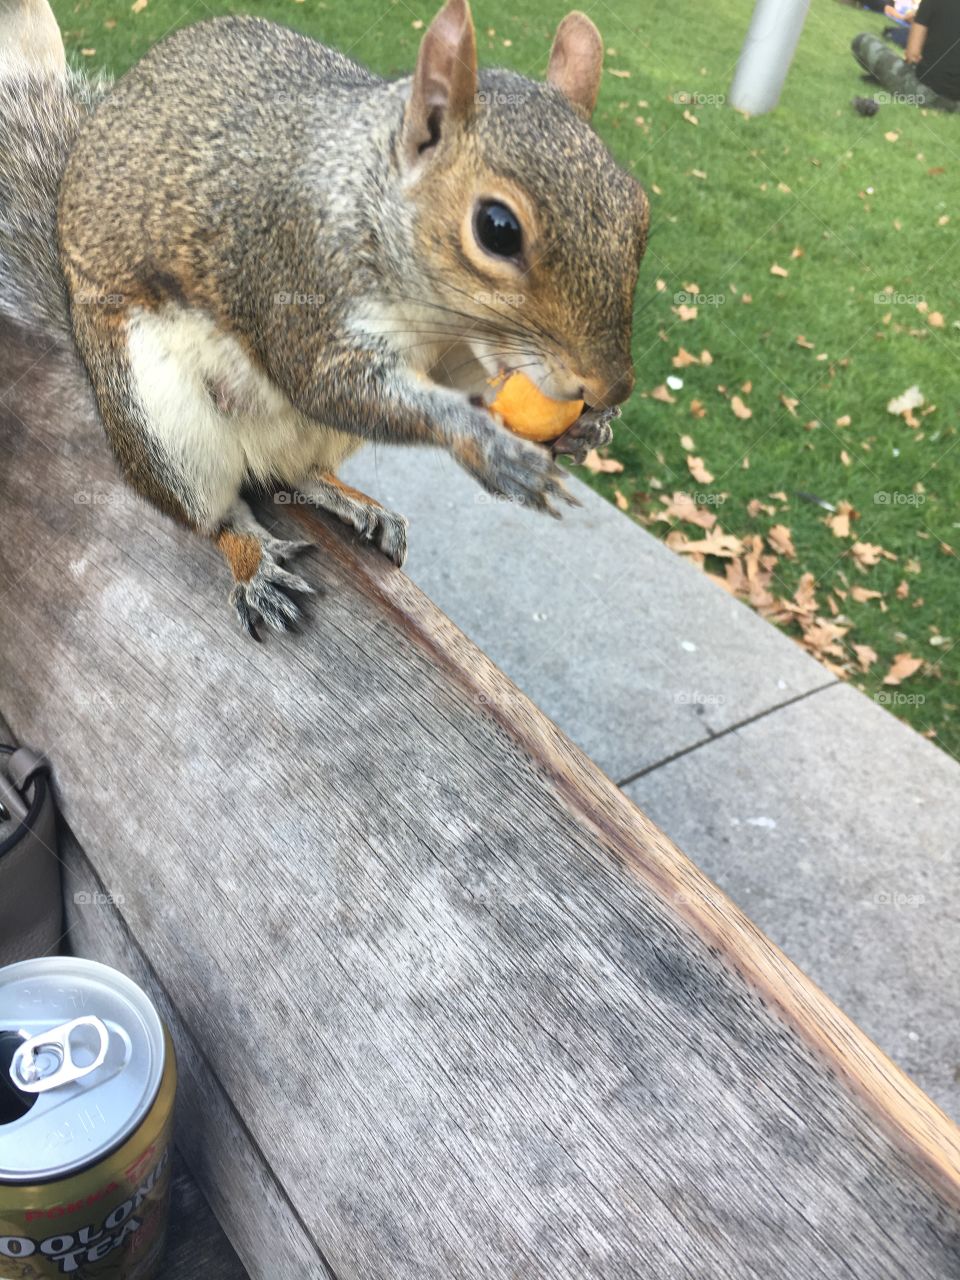 Just a normal day with a random hungry squirrel 